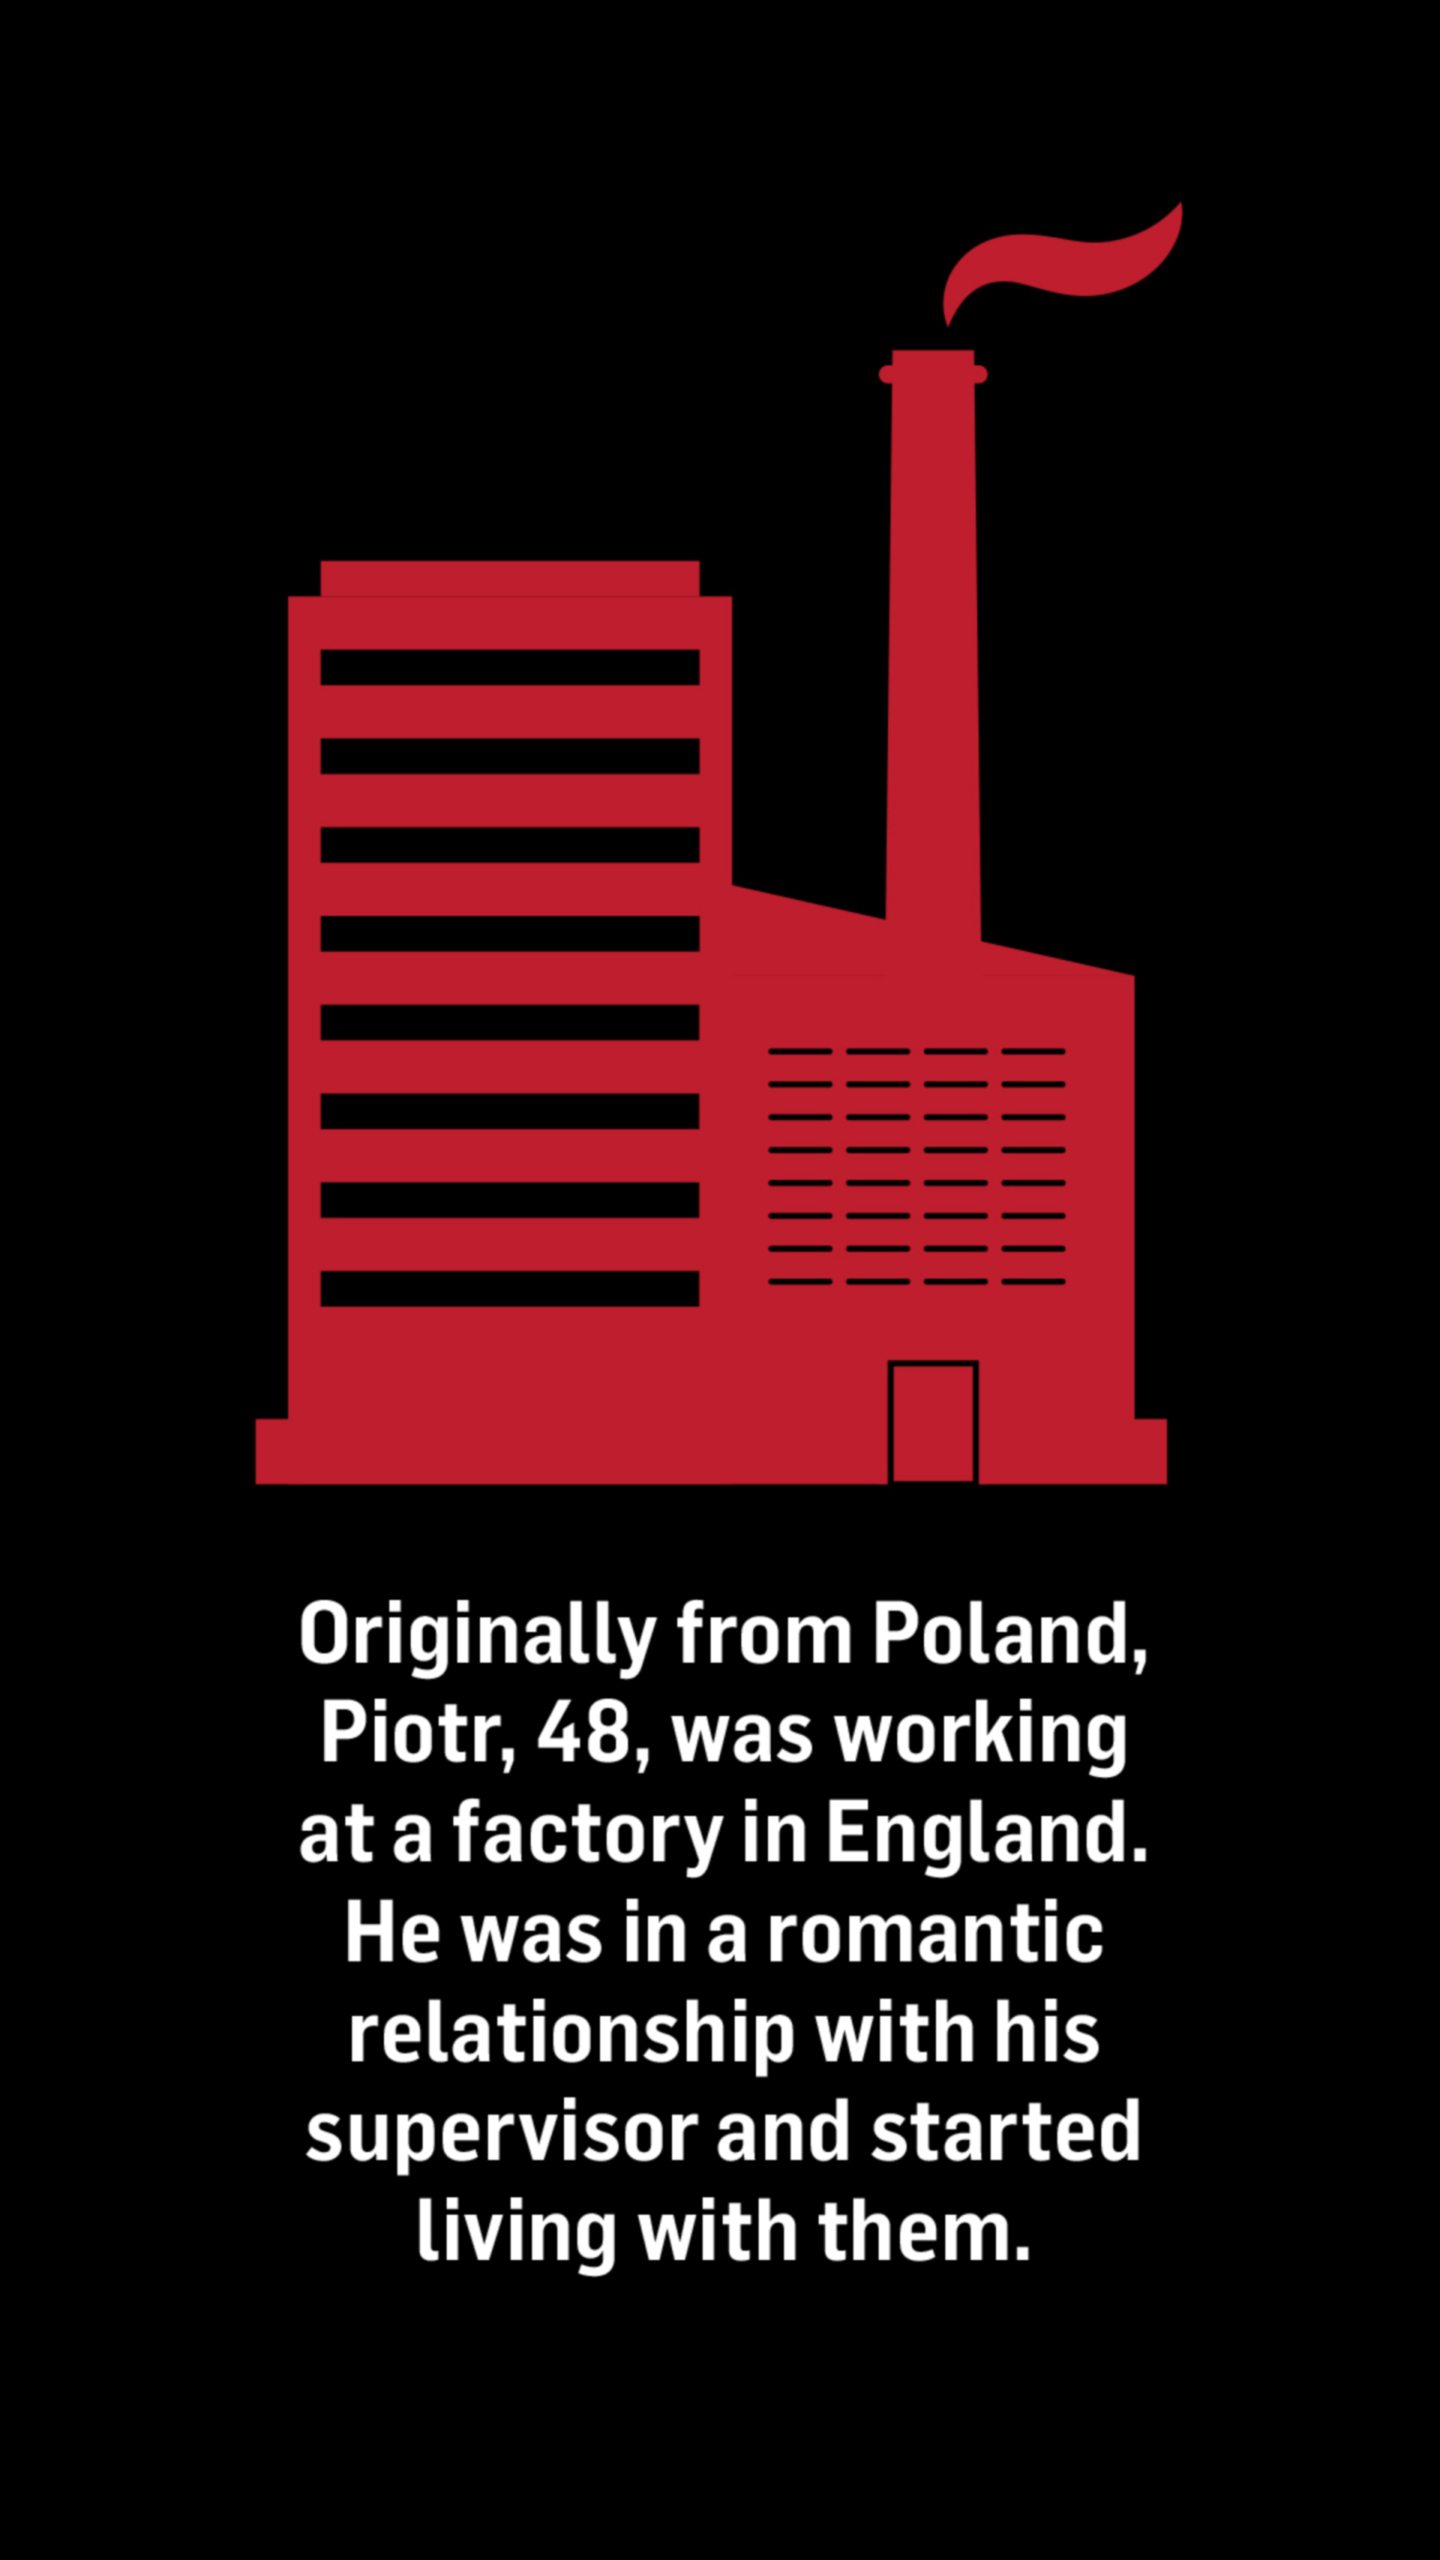 An illustration of a silhouette of a factory building. Words below the image reads: Originally from Poland, Piotr, 48, was working at a factory in England. He was in a romantic relationship with his supervisor and started living with them.